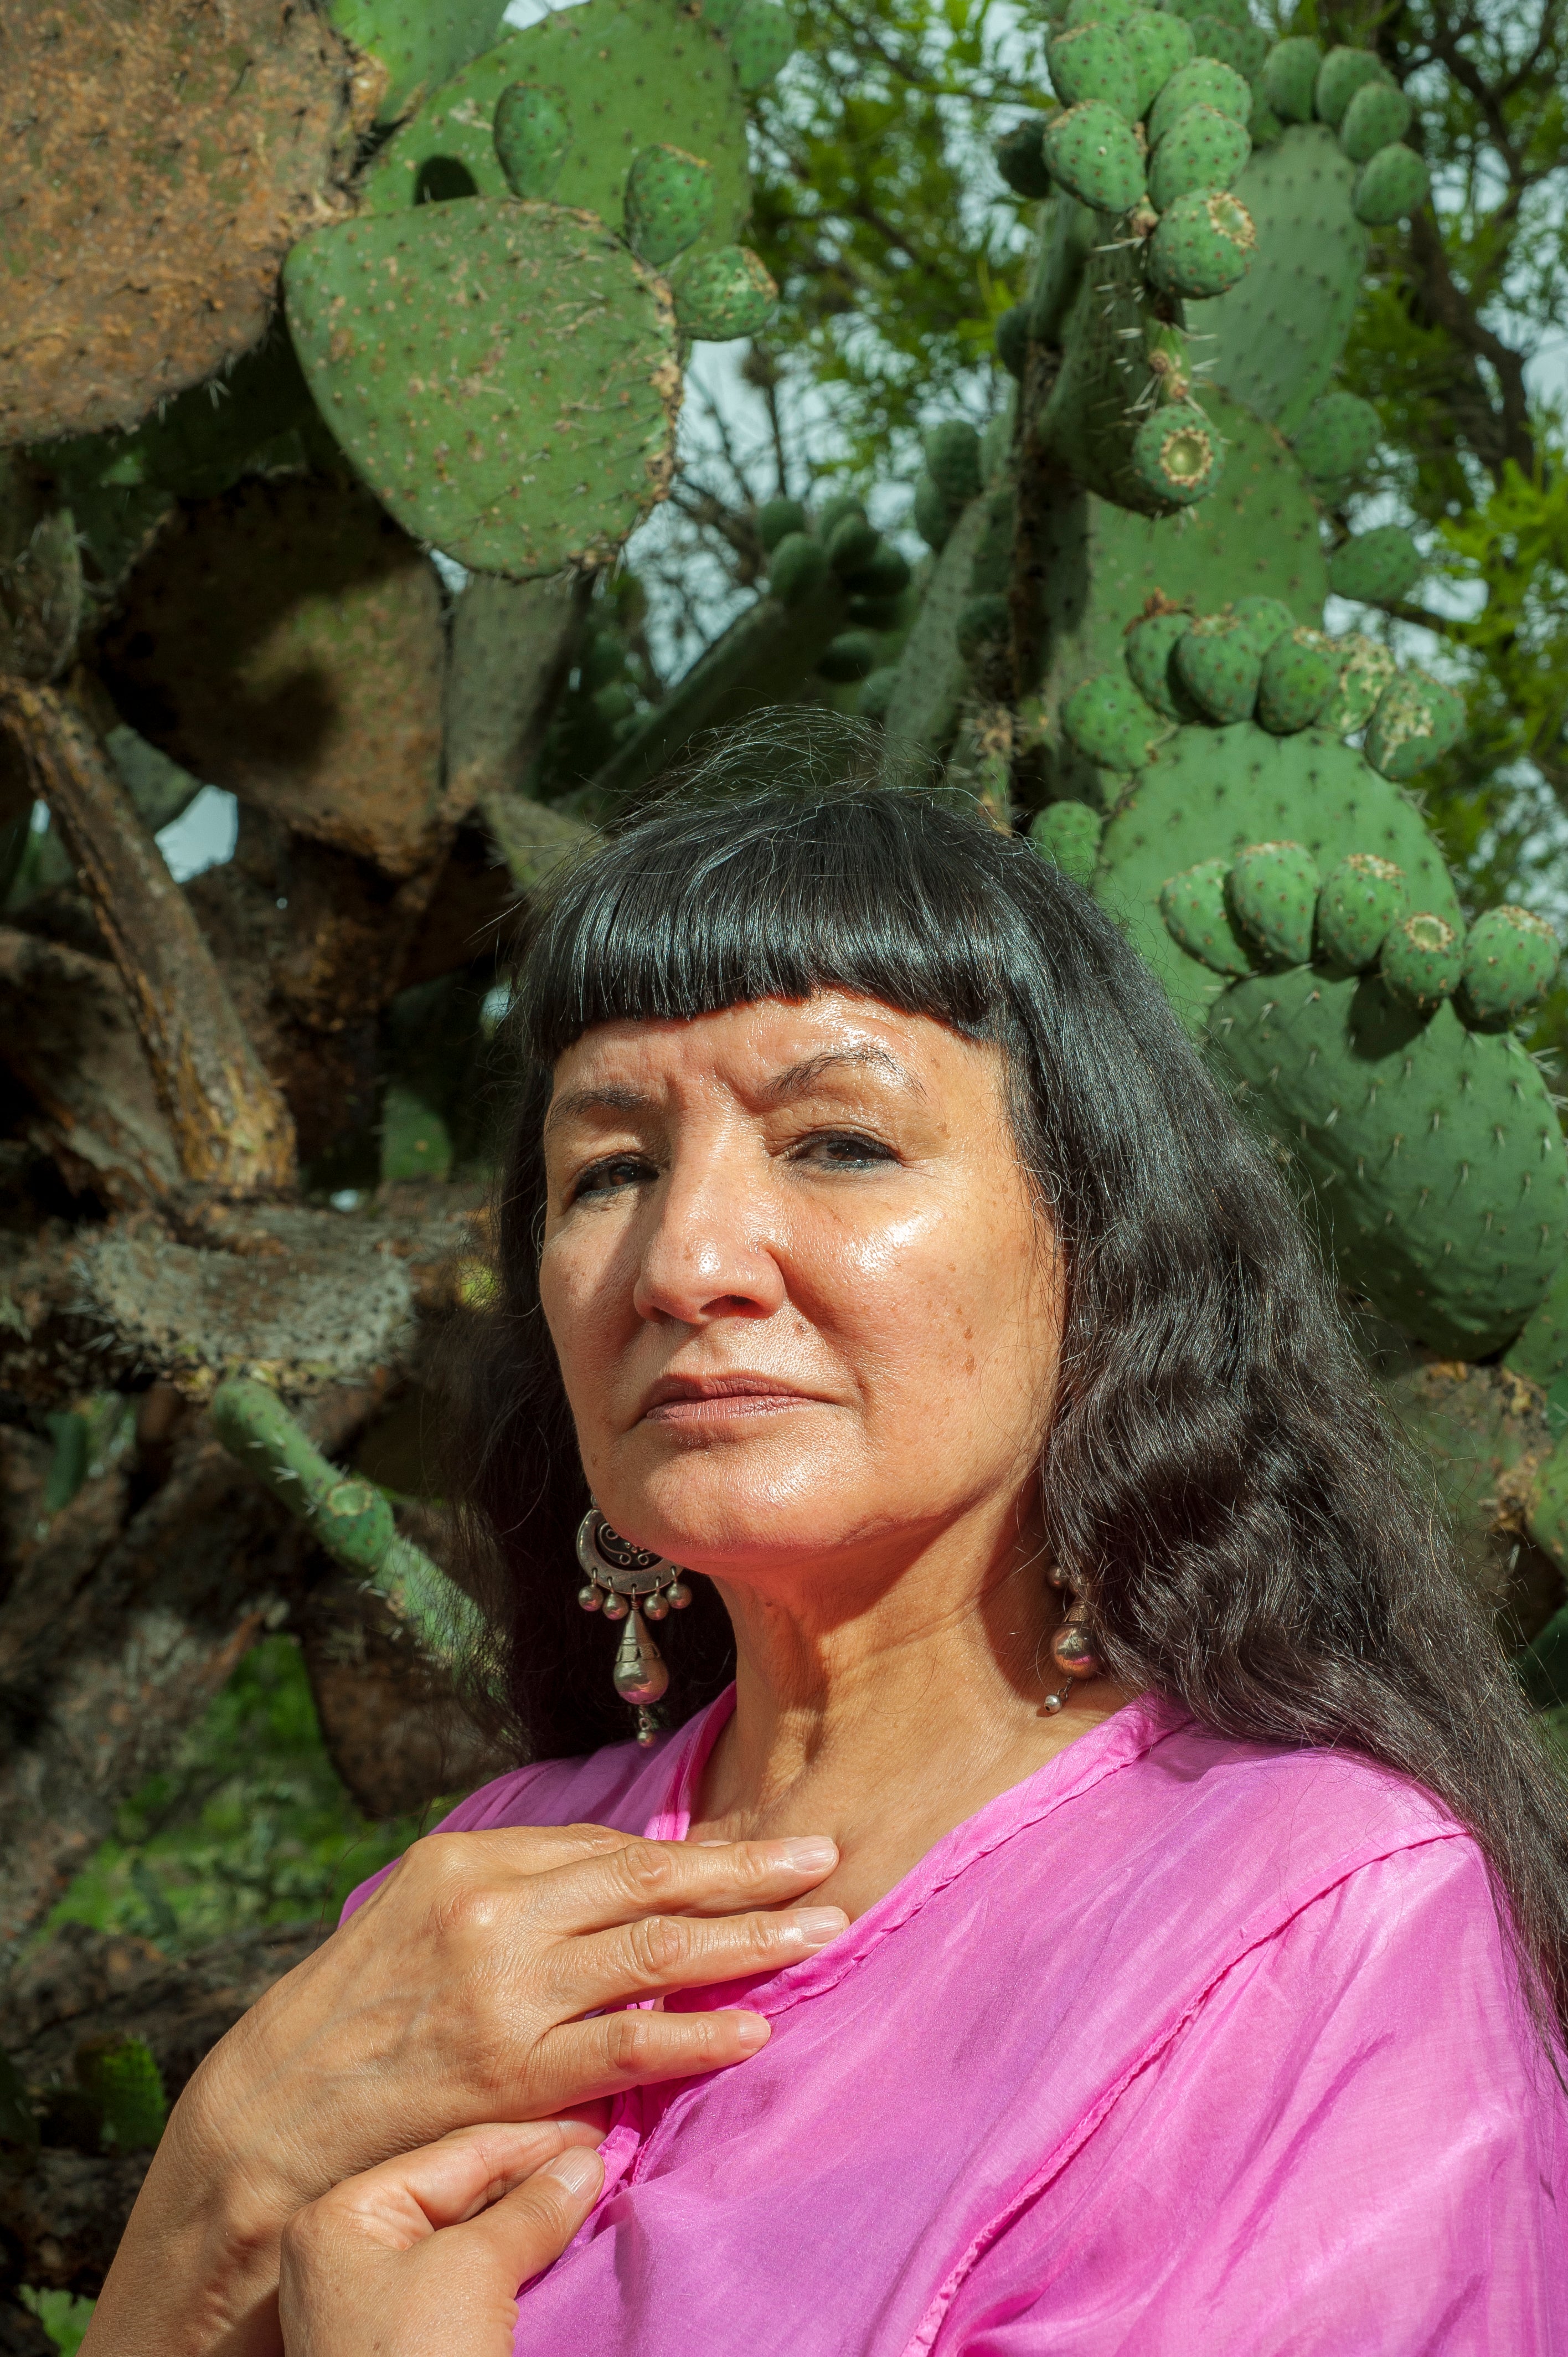 Outdoor portrait photo session with author and poet Sandra Cisneros in and around the town of San Miguel de Allende, Guanajuato, Mexico..